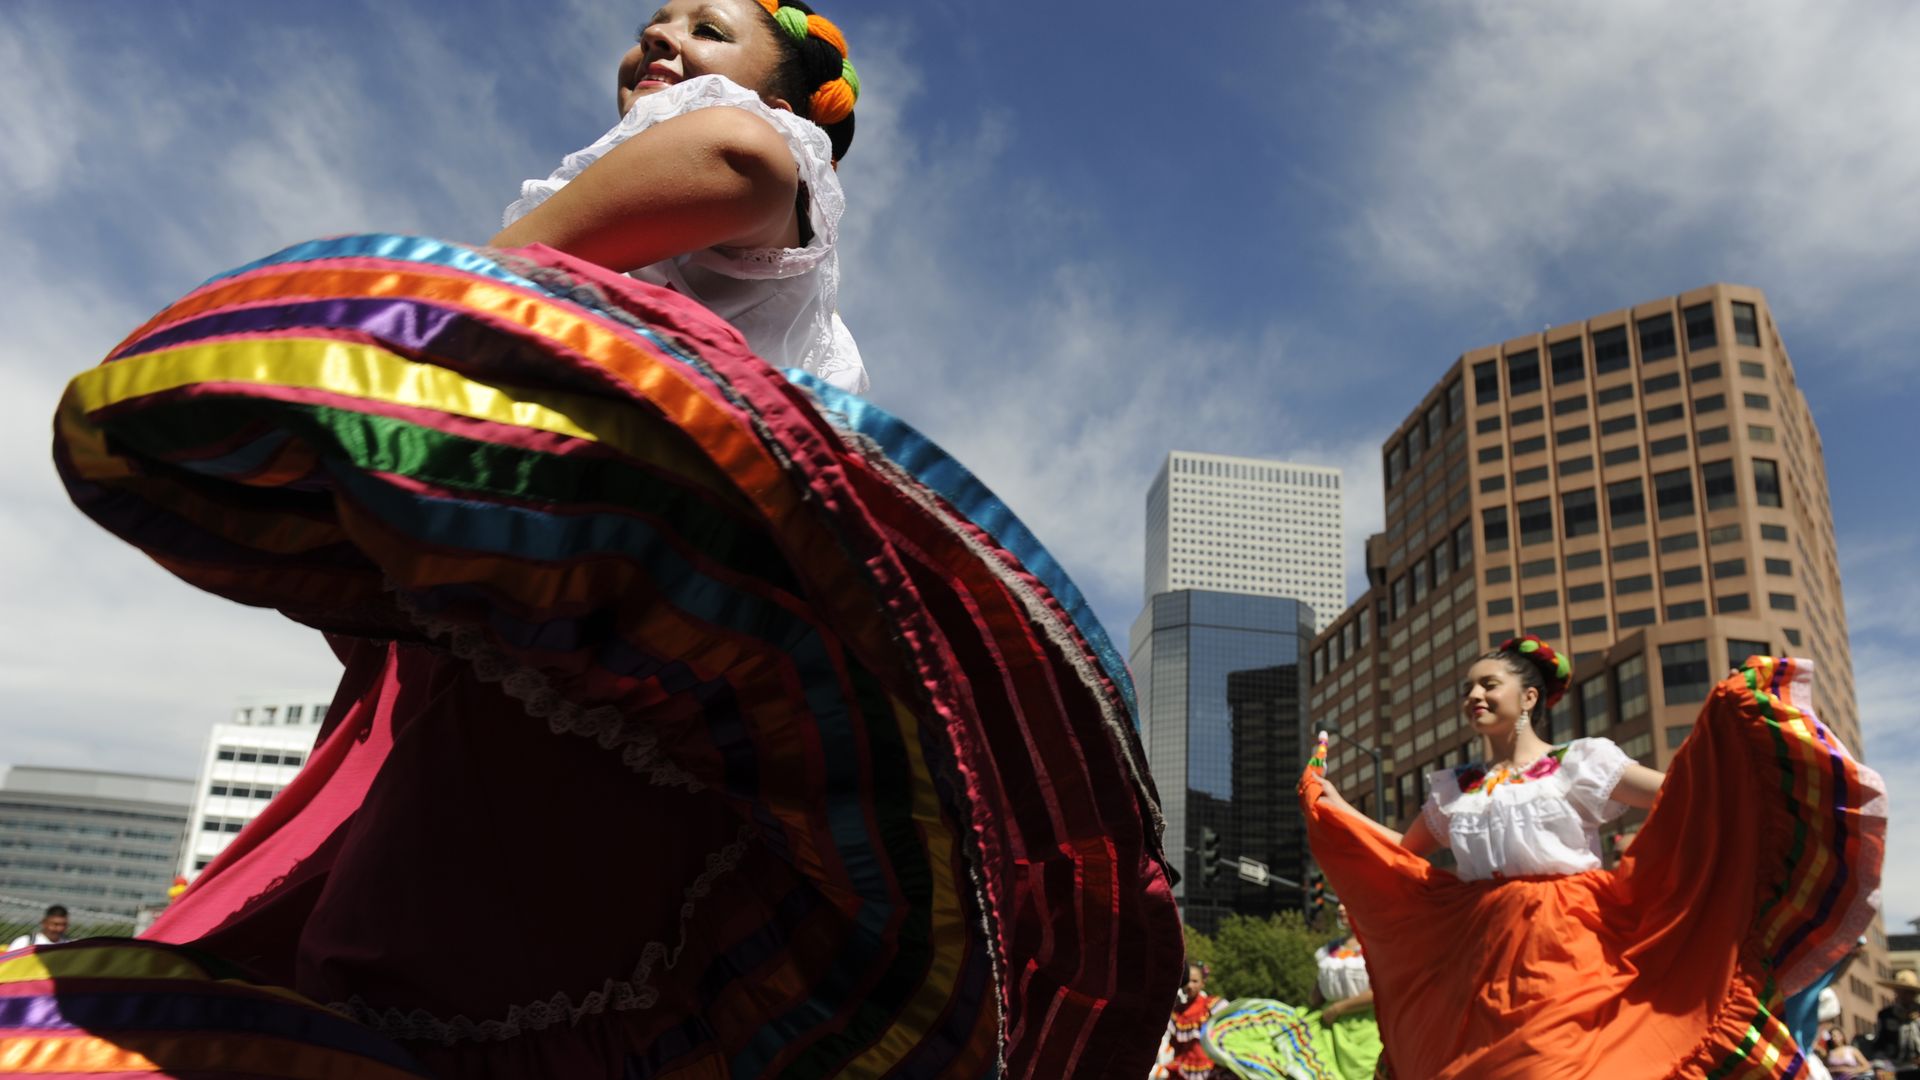 Two Mexican dancers twirl their colorful dresses in Civic Center Park